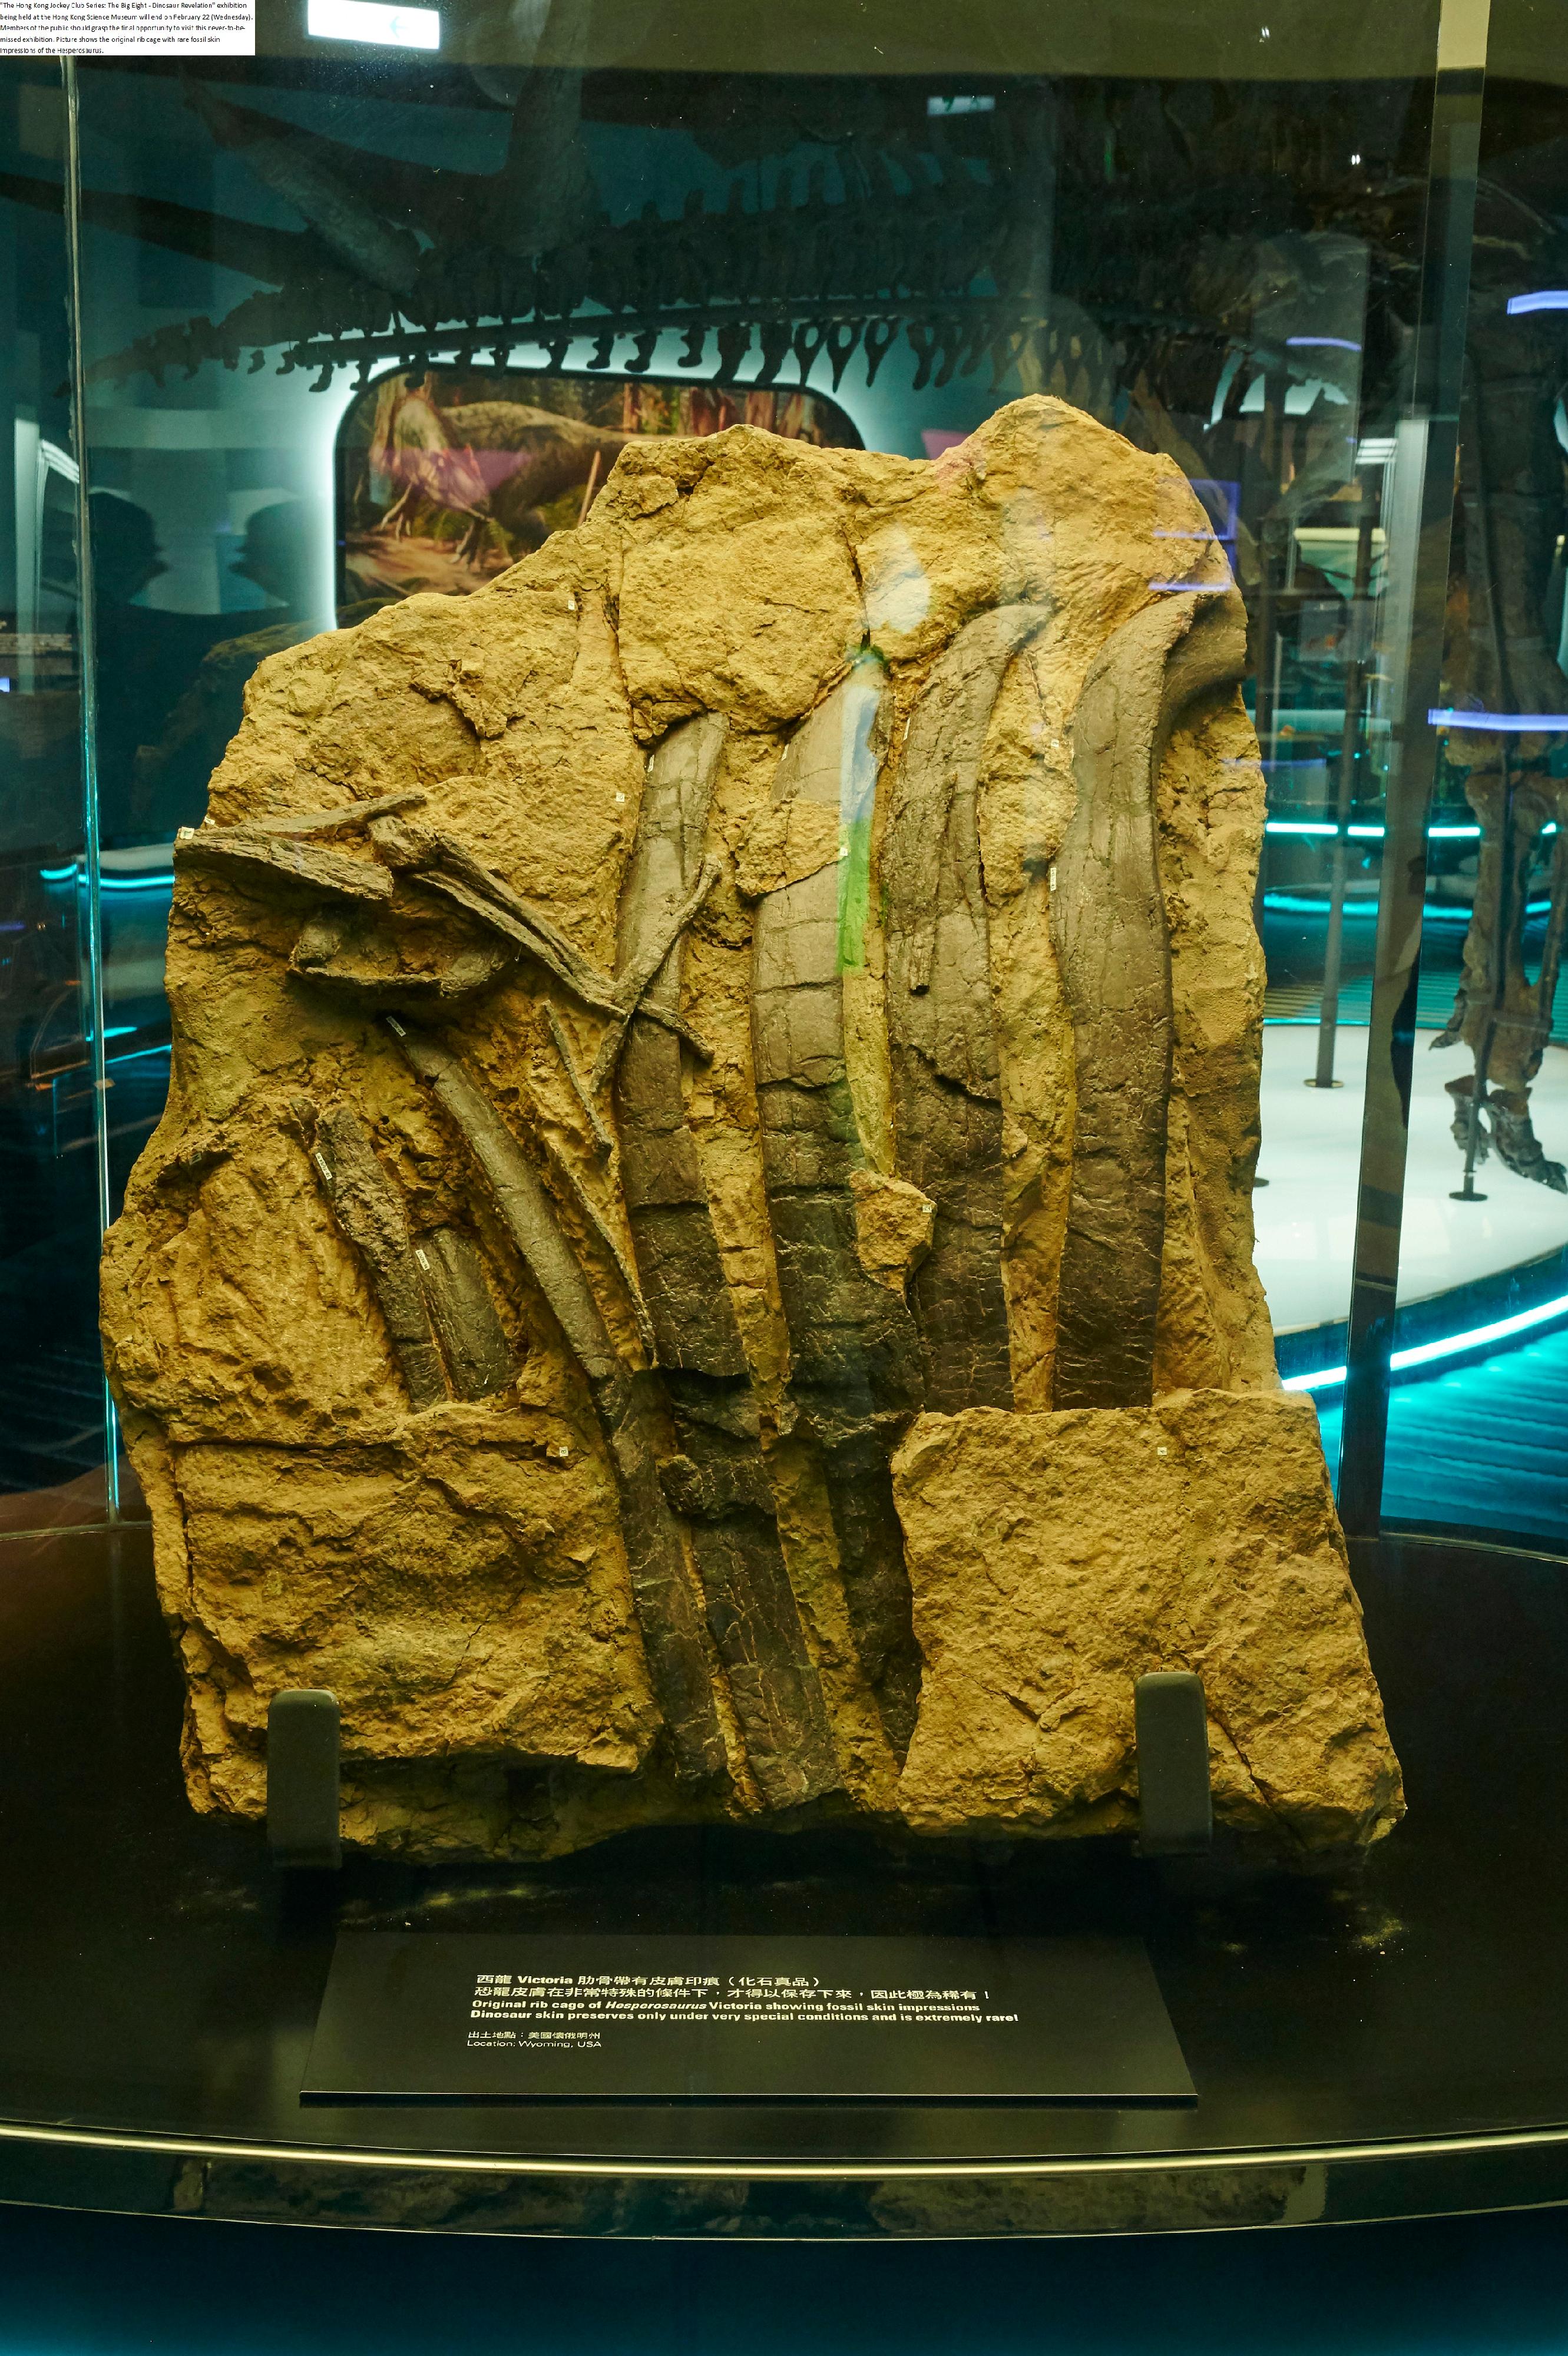 "The Hong Kong Jockey Club Series: The Big Eight - Dinosaur Revelation" exhibition being held at the Hong Kong Science Museum will end on February 22 (Wednesday). Members of the public should grasp the final opportunity to visit this not-to-be-missed exhibition. Picture shows the original rib cage with rare fossil skin impressions of the Hesperosaurus.